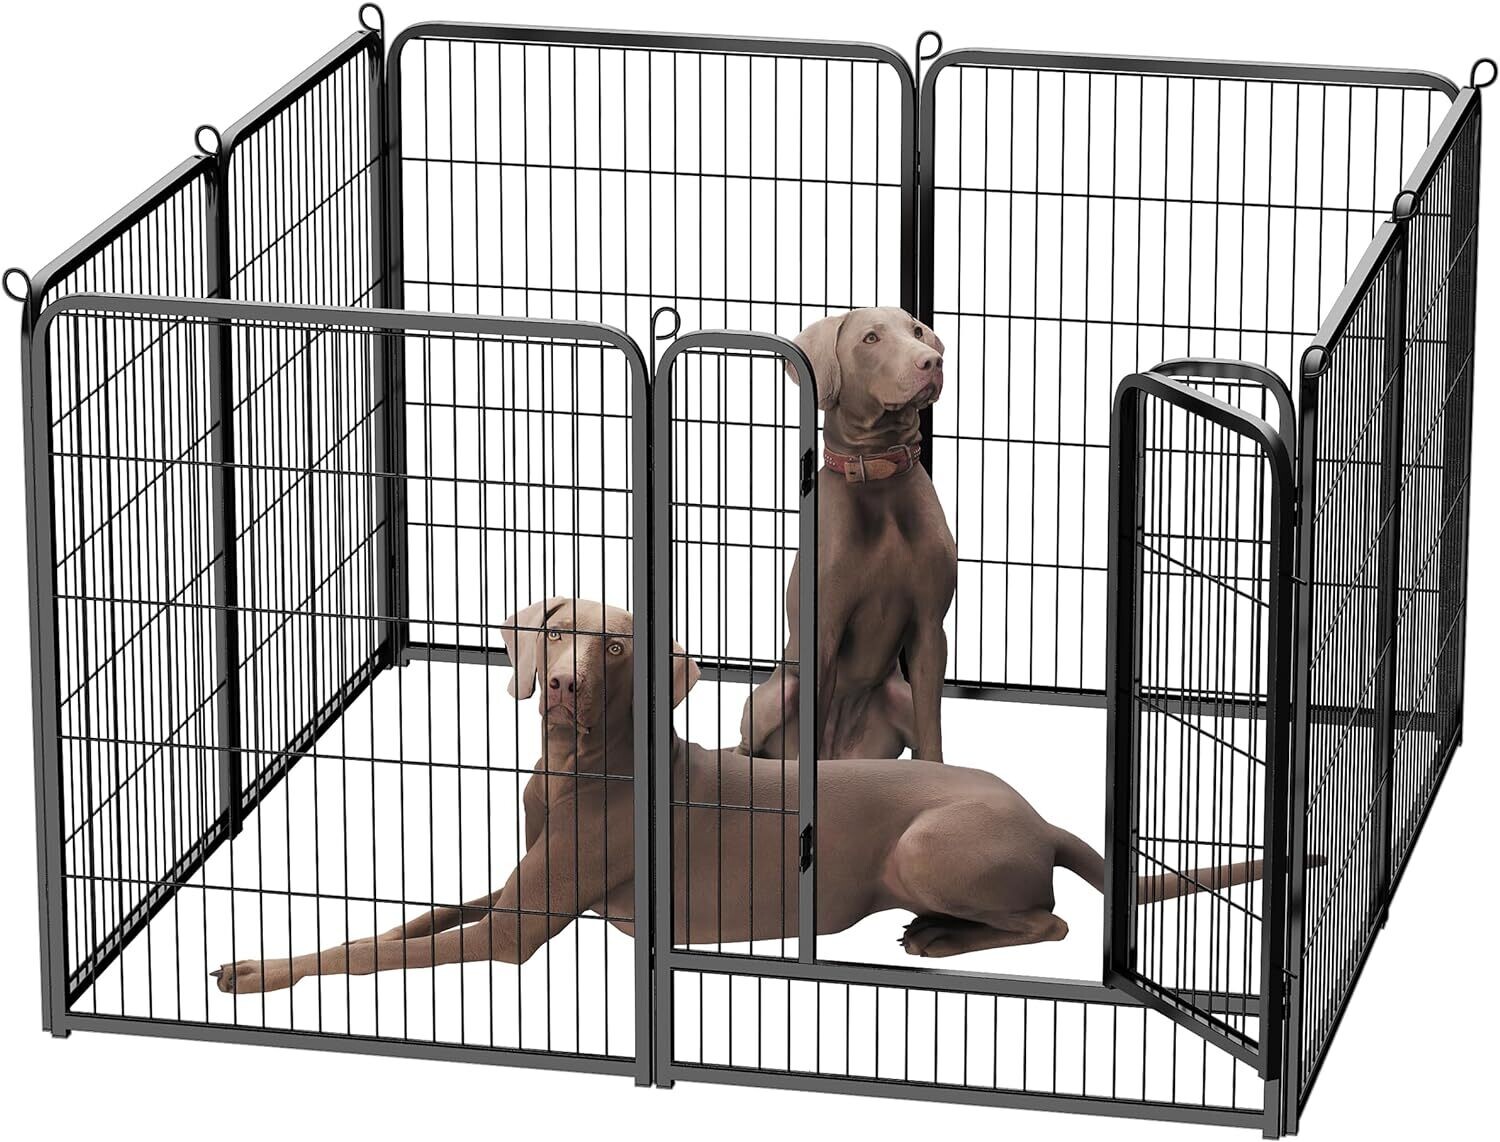 8 Panel Puppy Pen with Door, High 100cm Indoor/Outdoor Pet Exercise Playpen, Portable Detachable Animal Run Enclosures for Dogs, Puppies, Cats, Rabbits and Other Animals